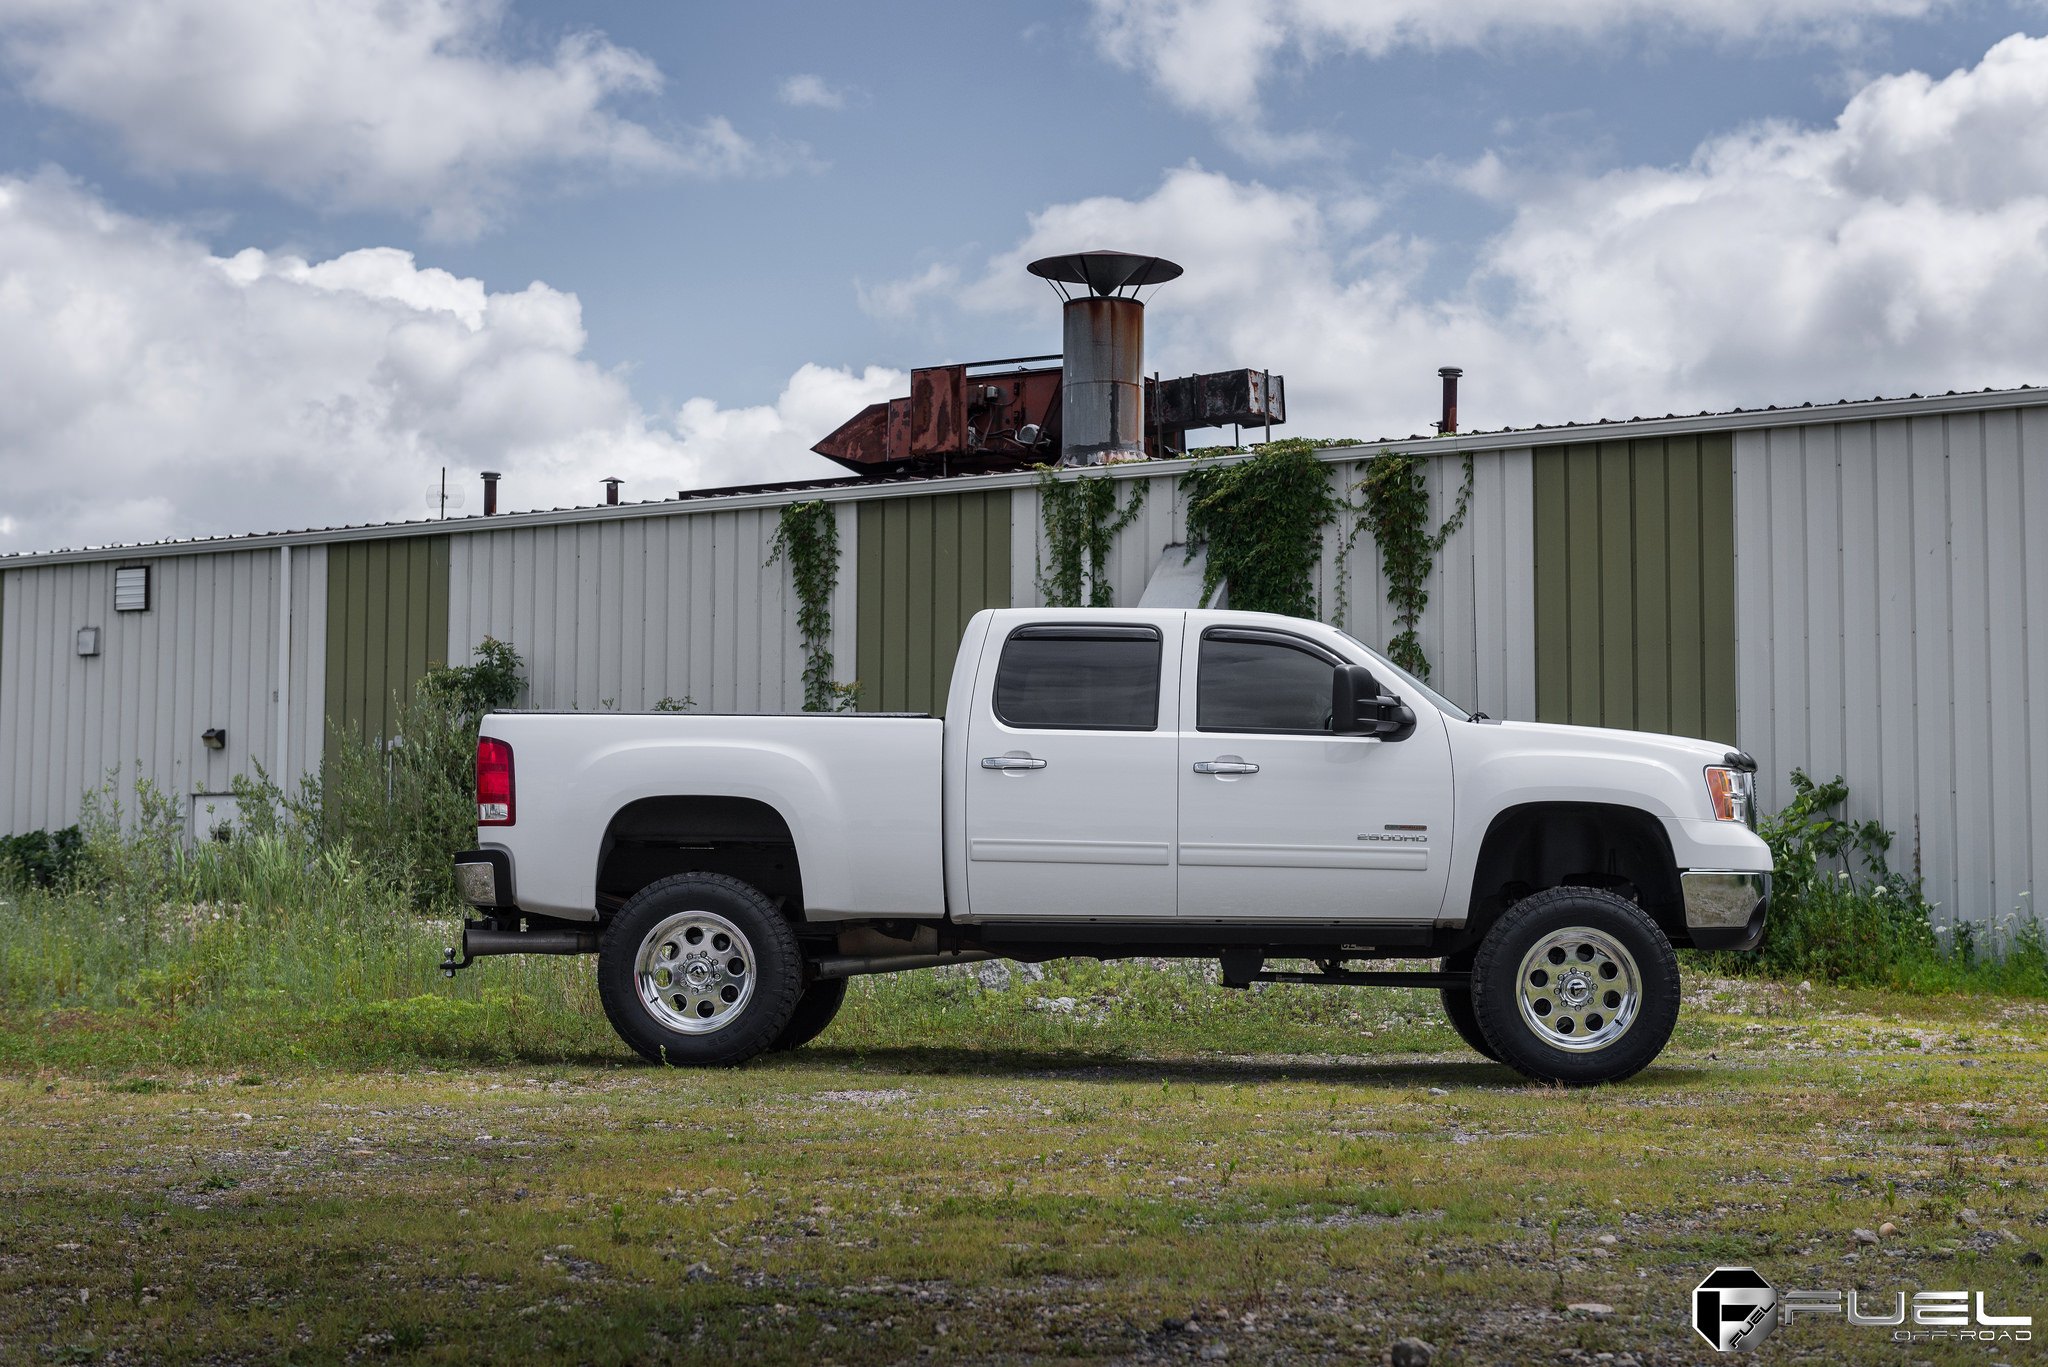 White GMC Sierra with Retractable Running Boards - Photo by Fuel Offroad